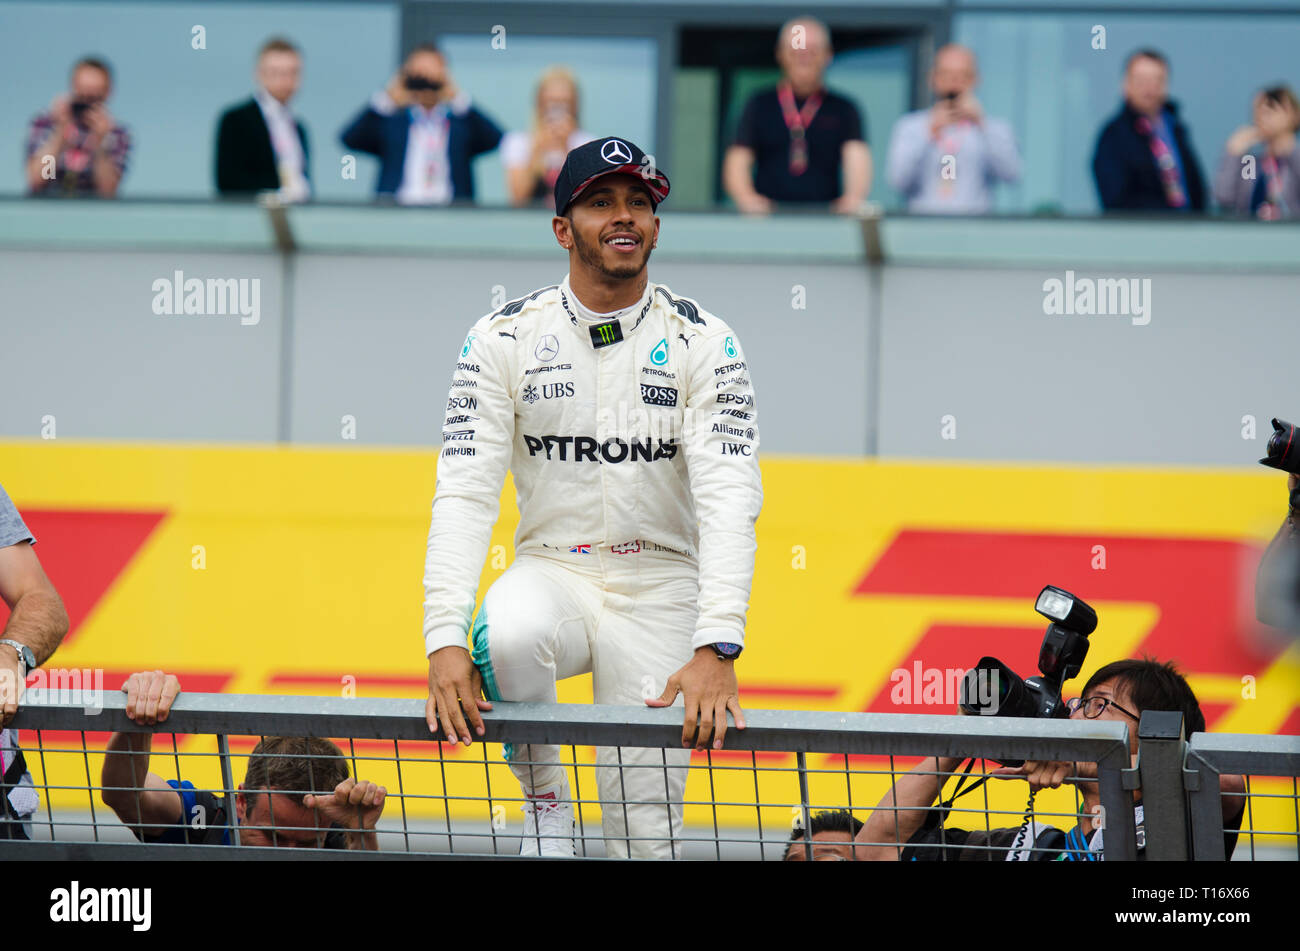 Lewis Hamilton celebrating after winning the British F1 Grand Prix at Silverstone in 2017. Stock Photo